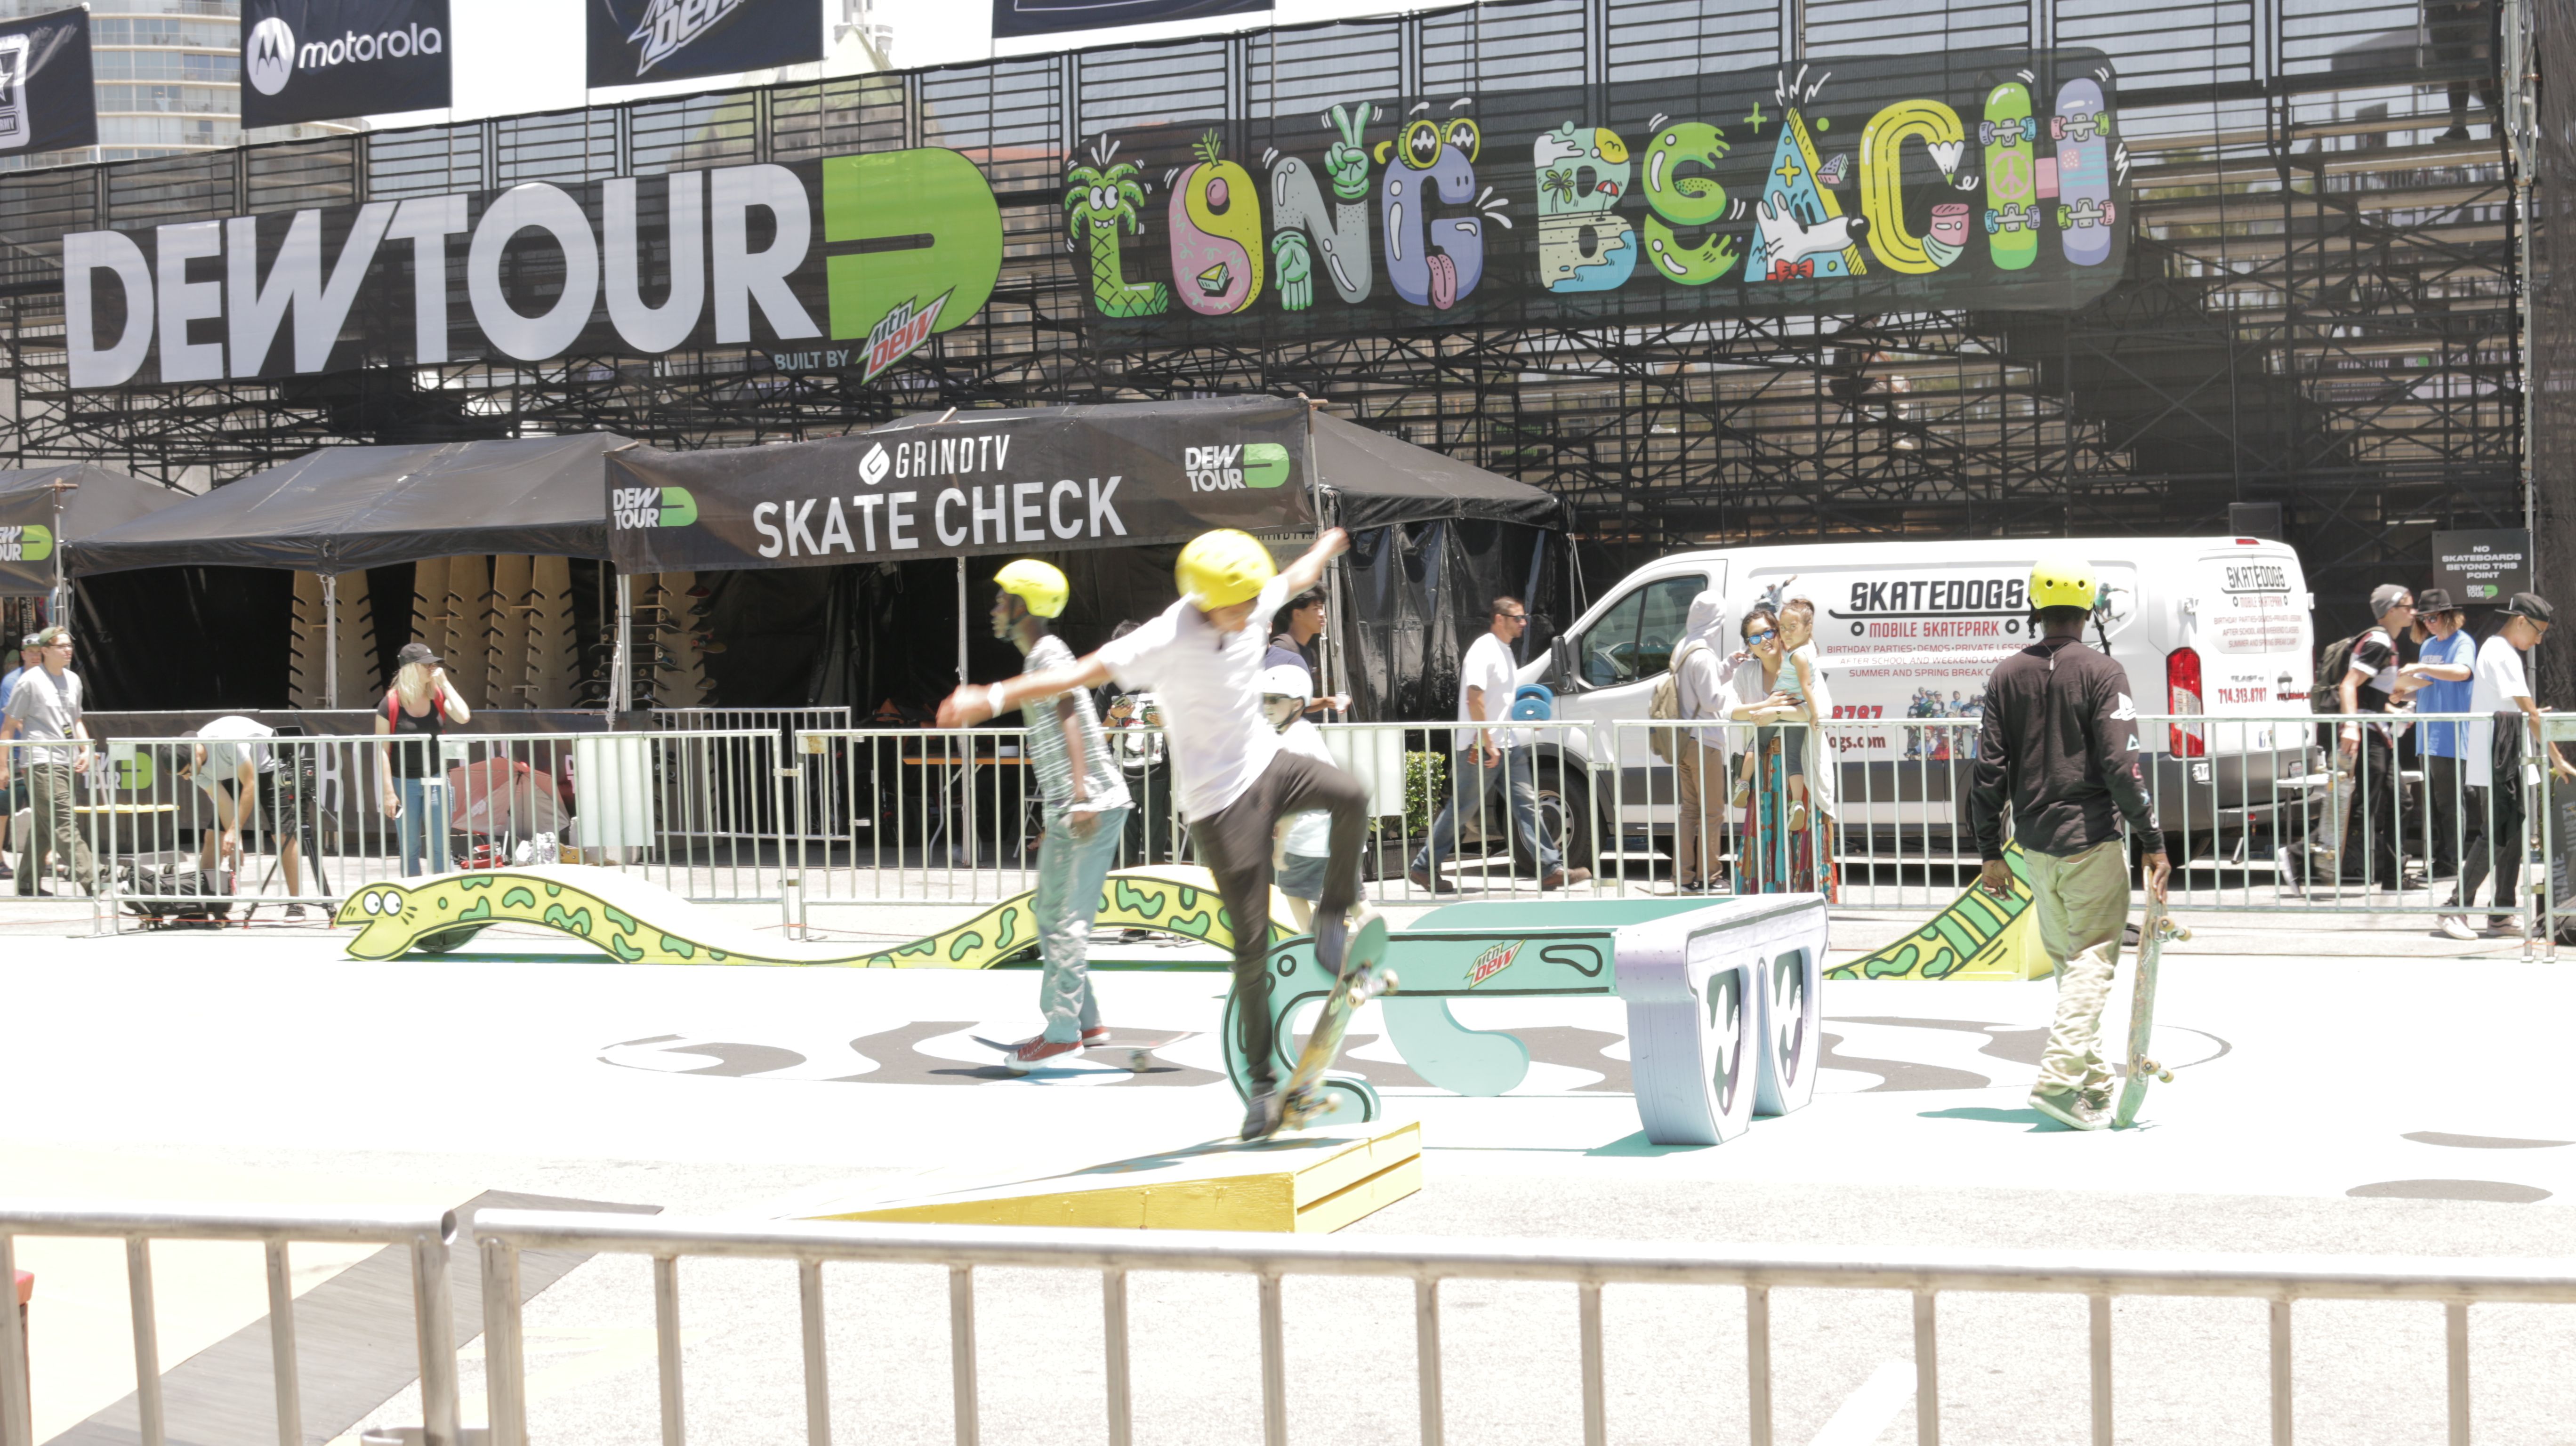 What to Expect from This Year’s Dew Tour: Skating and Modern Art Perfectly Blended